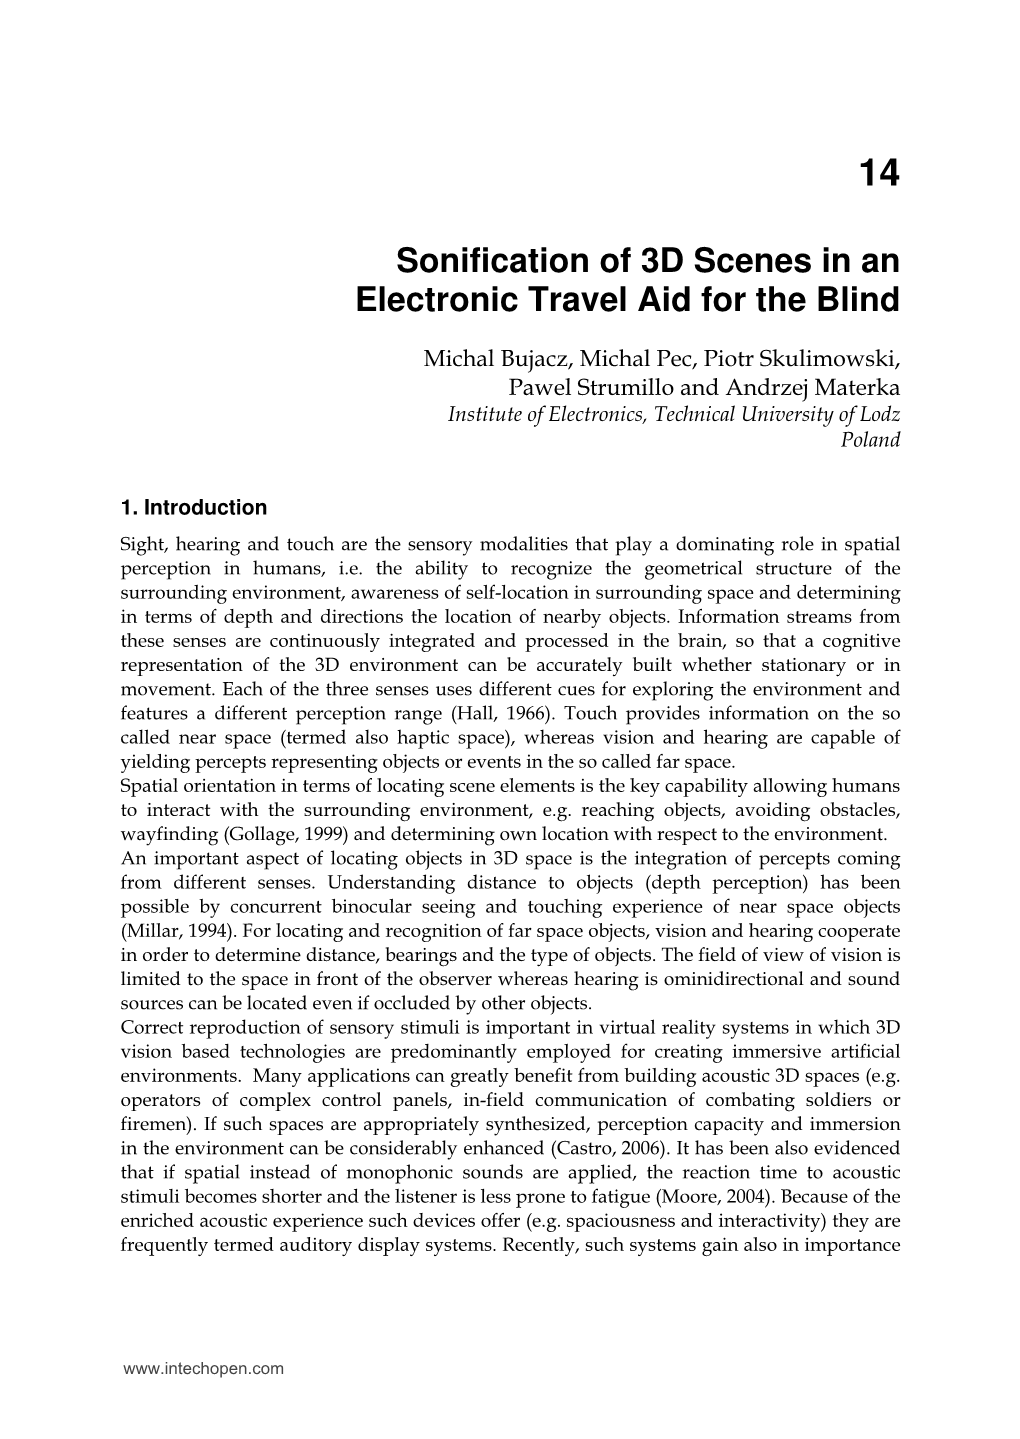 Sonification of 3D Scenes in an Electronic Travel Aid for the Blind